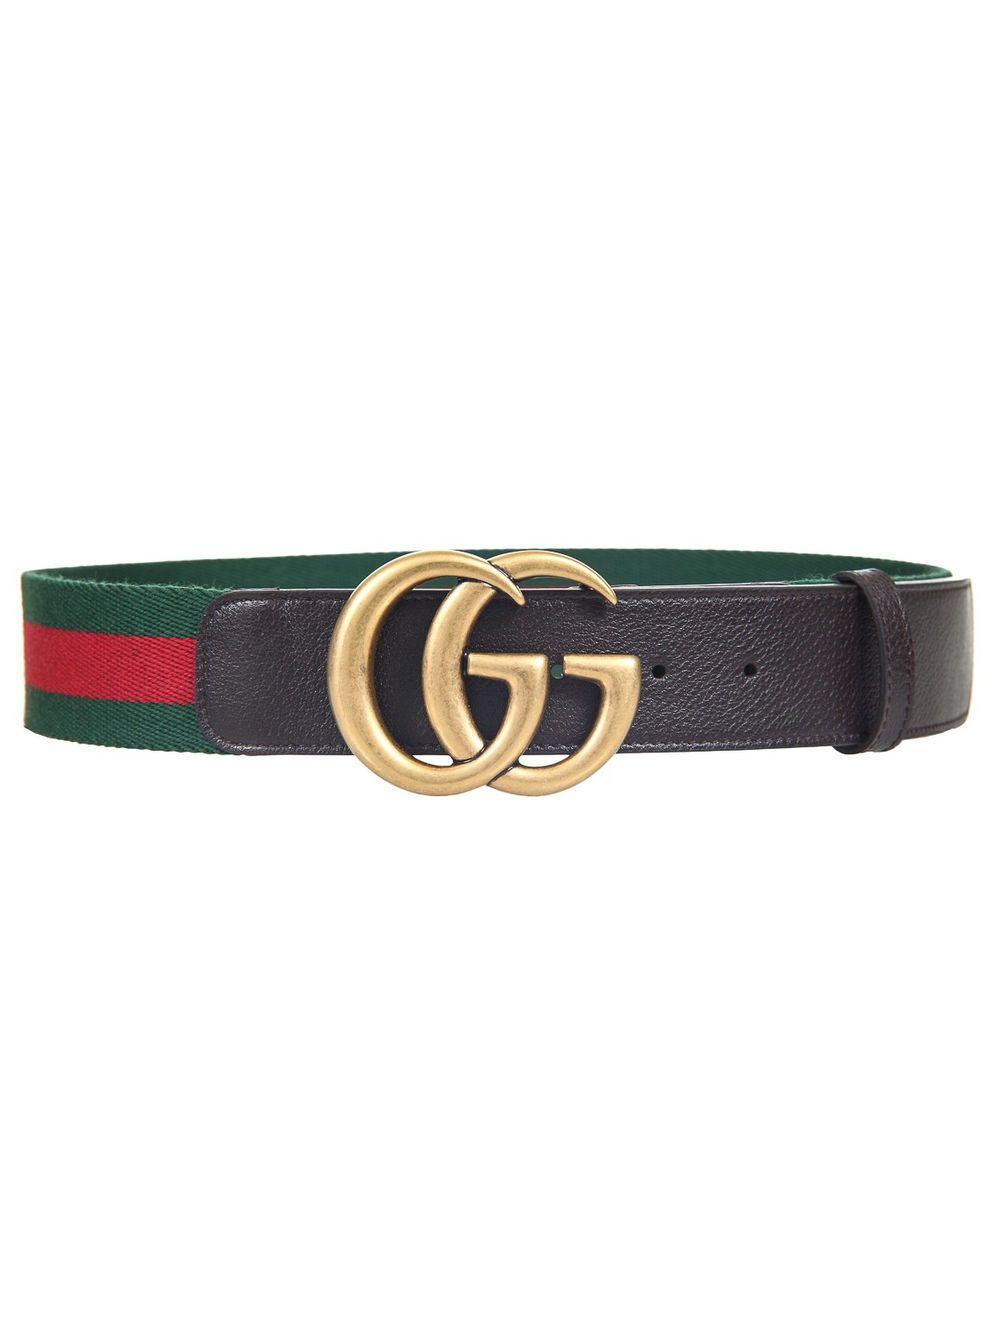 Indtil Sydøst gødning Gucci Canvas Web Belt With Double G Buckle in Brown - Lyst